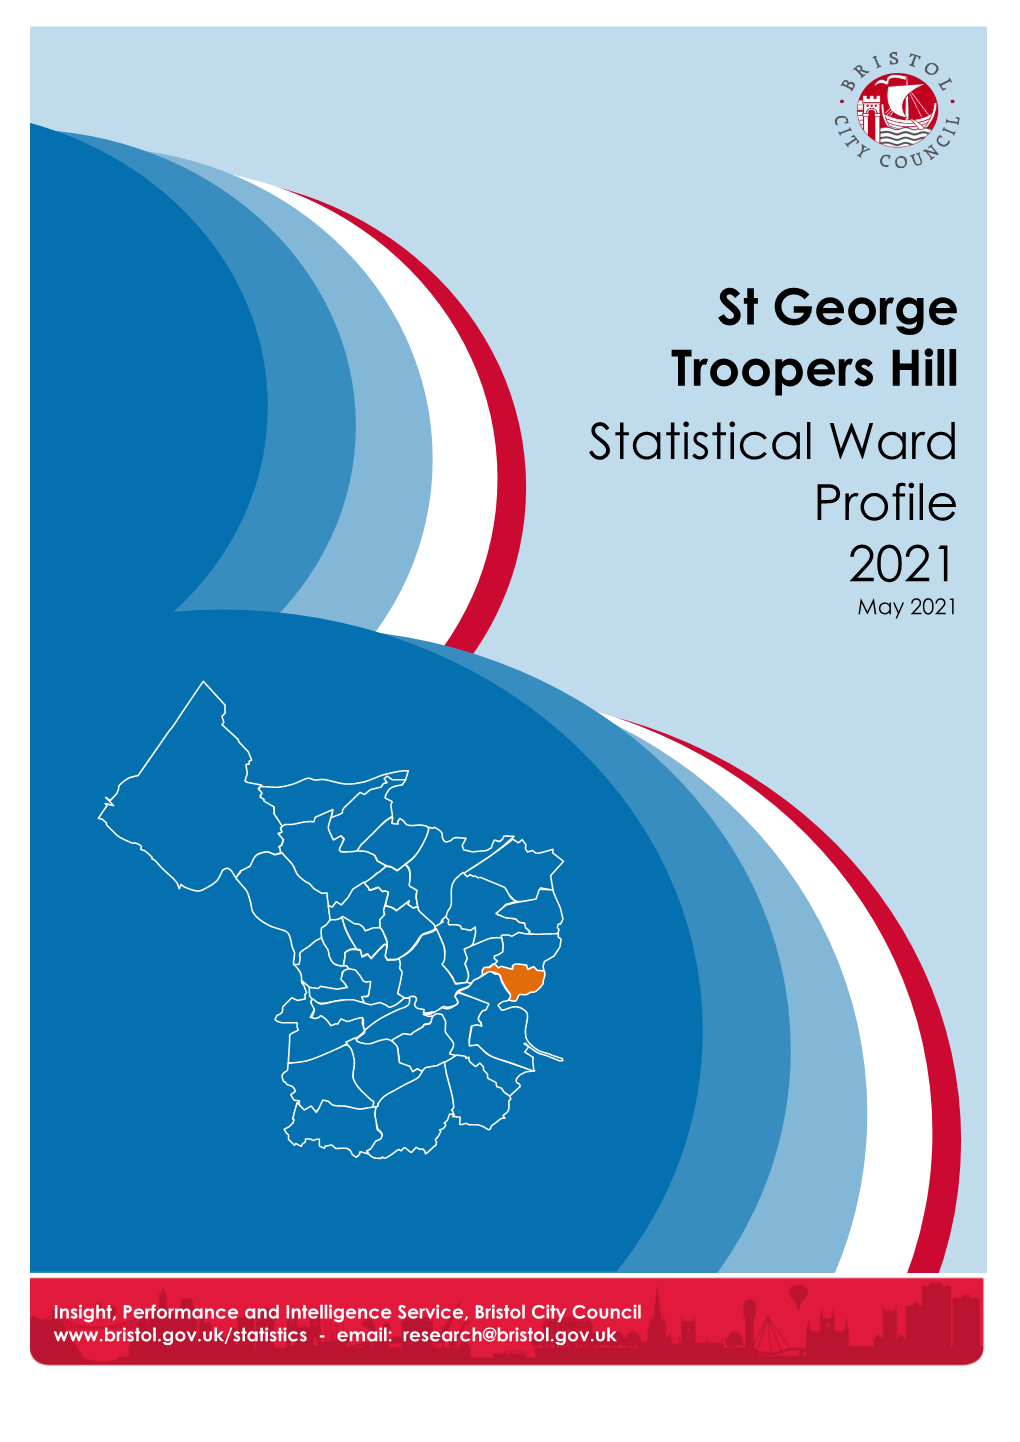 St George Troopers Hill Statistical Ward Profile 2021 May 2021